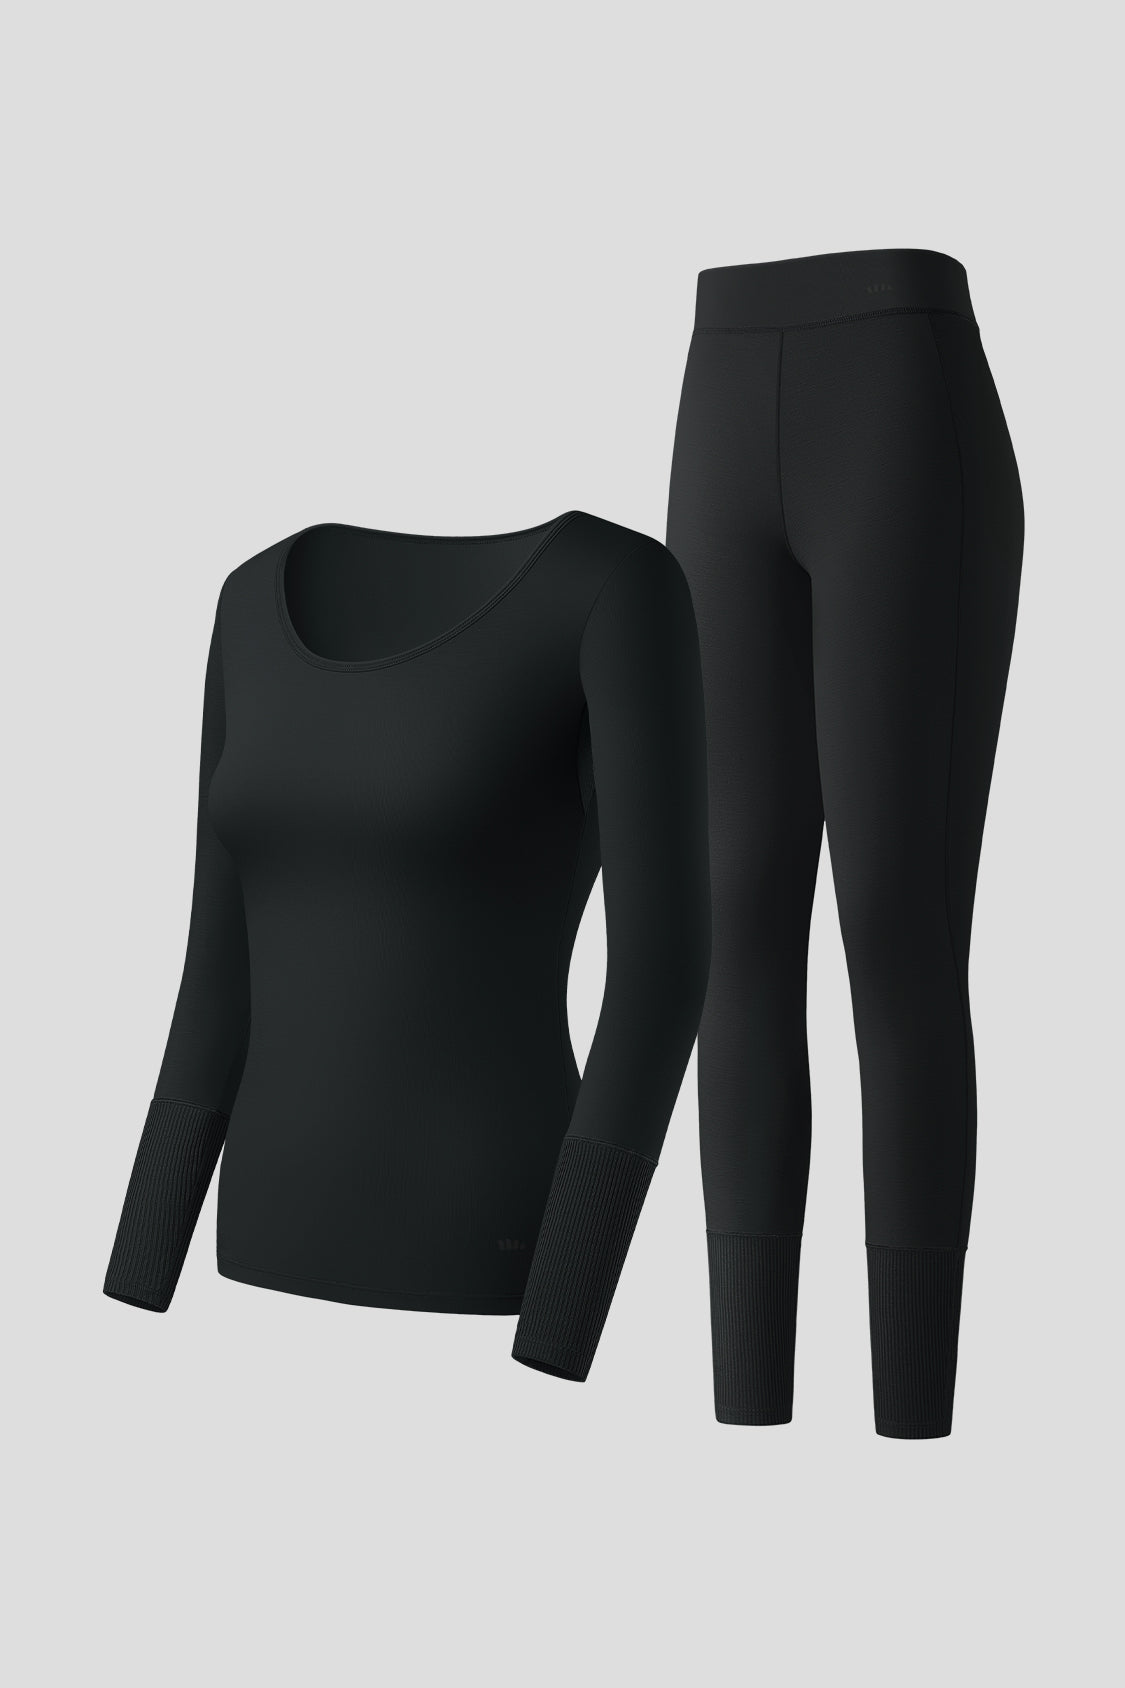 BUY Anti Microbial V Neck Thermal Underwear Set - Women's ON SALE